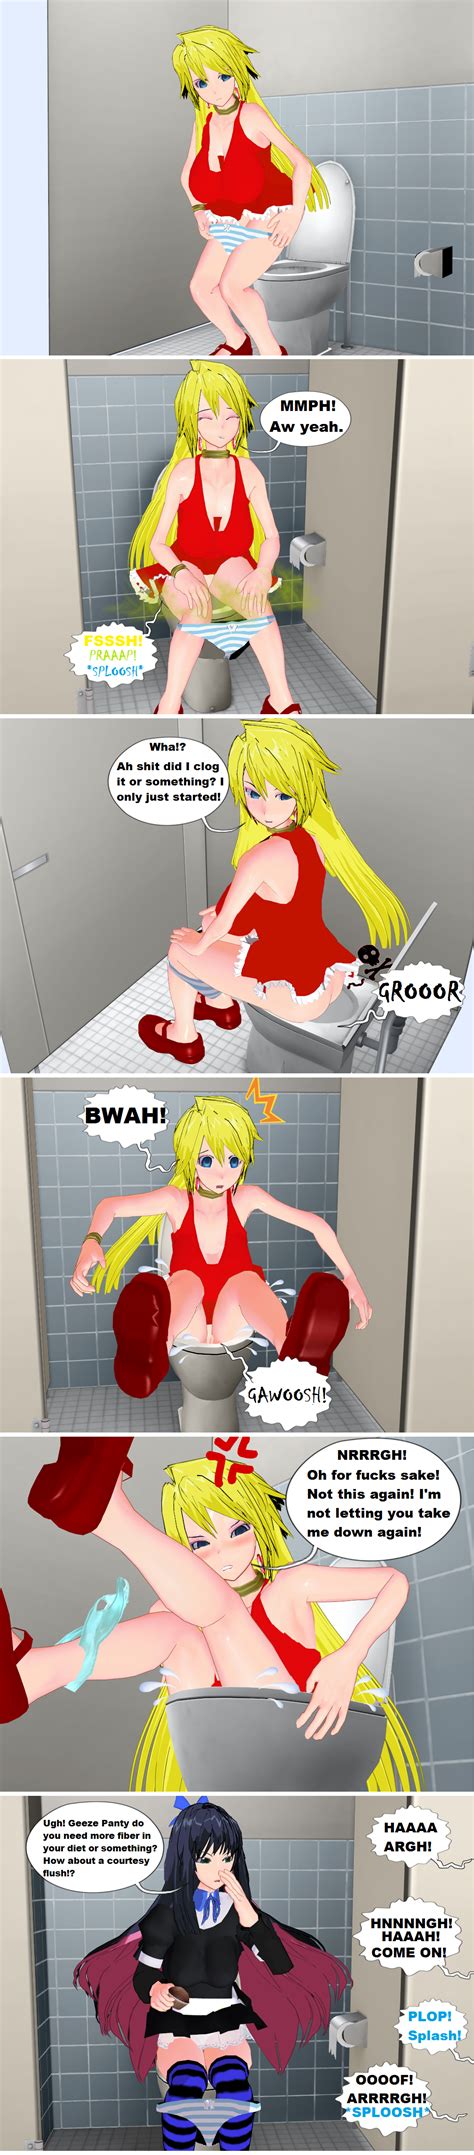 Girls On The Toilet Favourites By Daggr On Deviantart